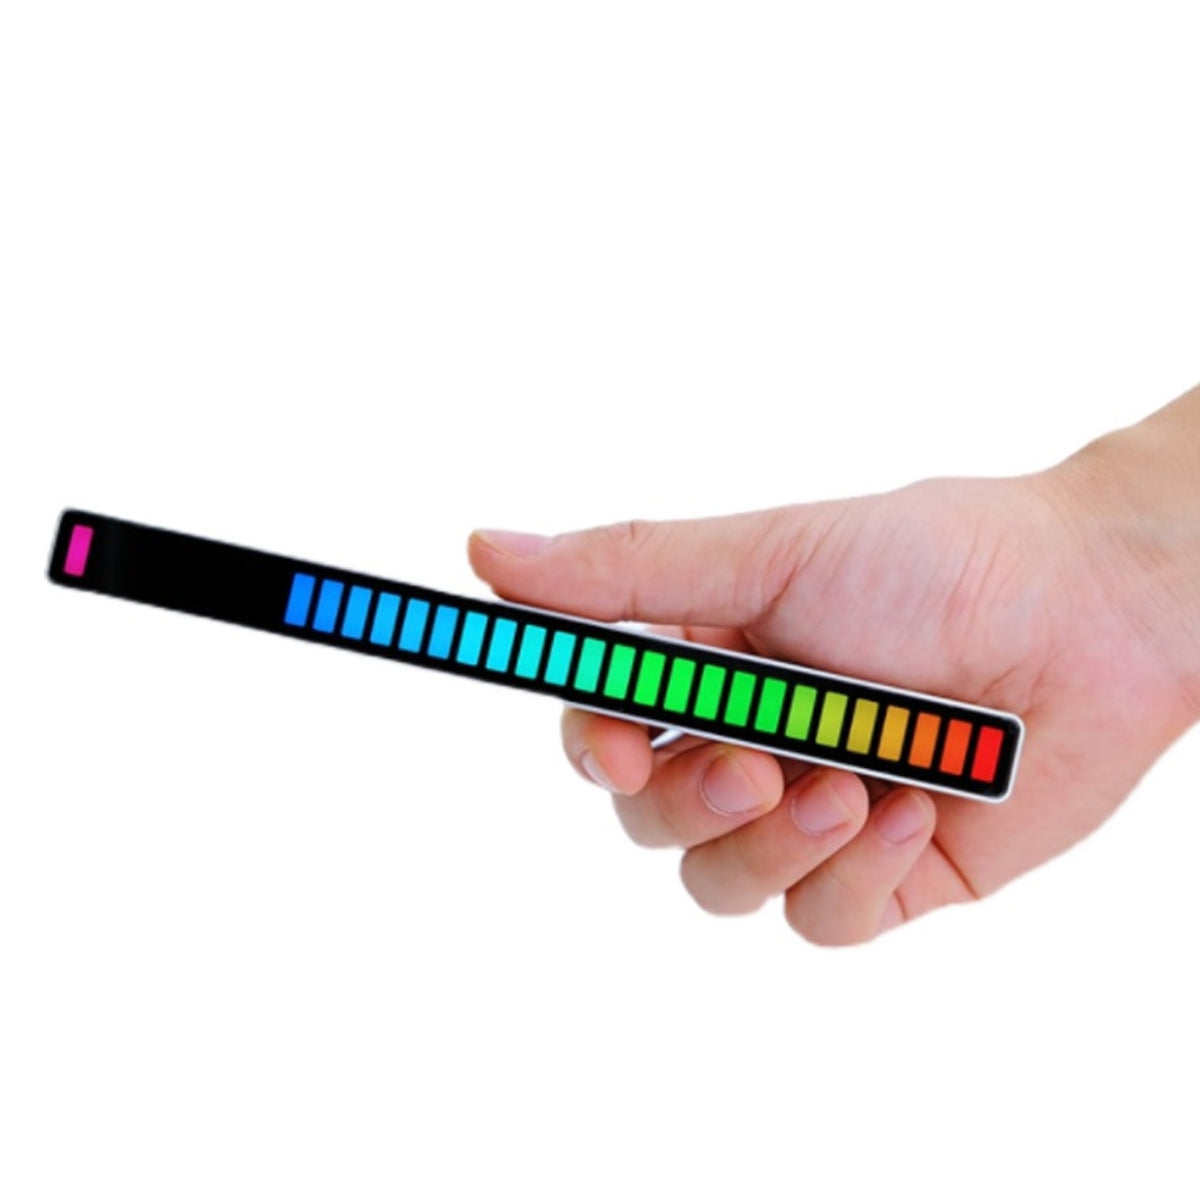  Dance To The Tunes Sound Activated Multi Color Light Bar by VistaShops VistaShops Perfumarie